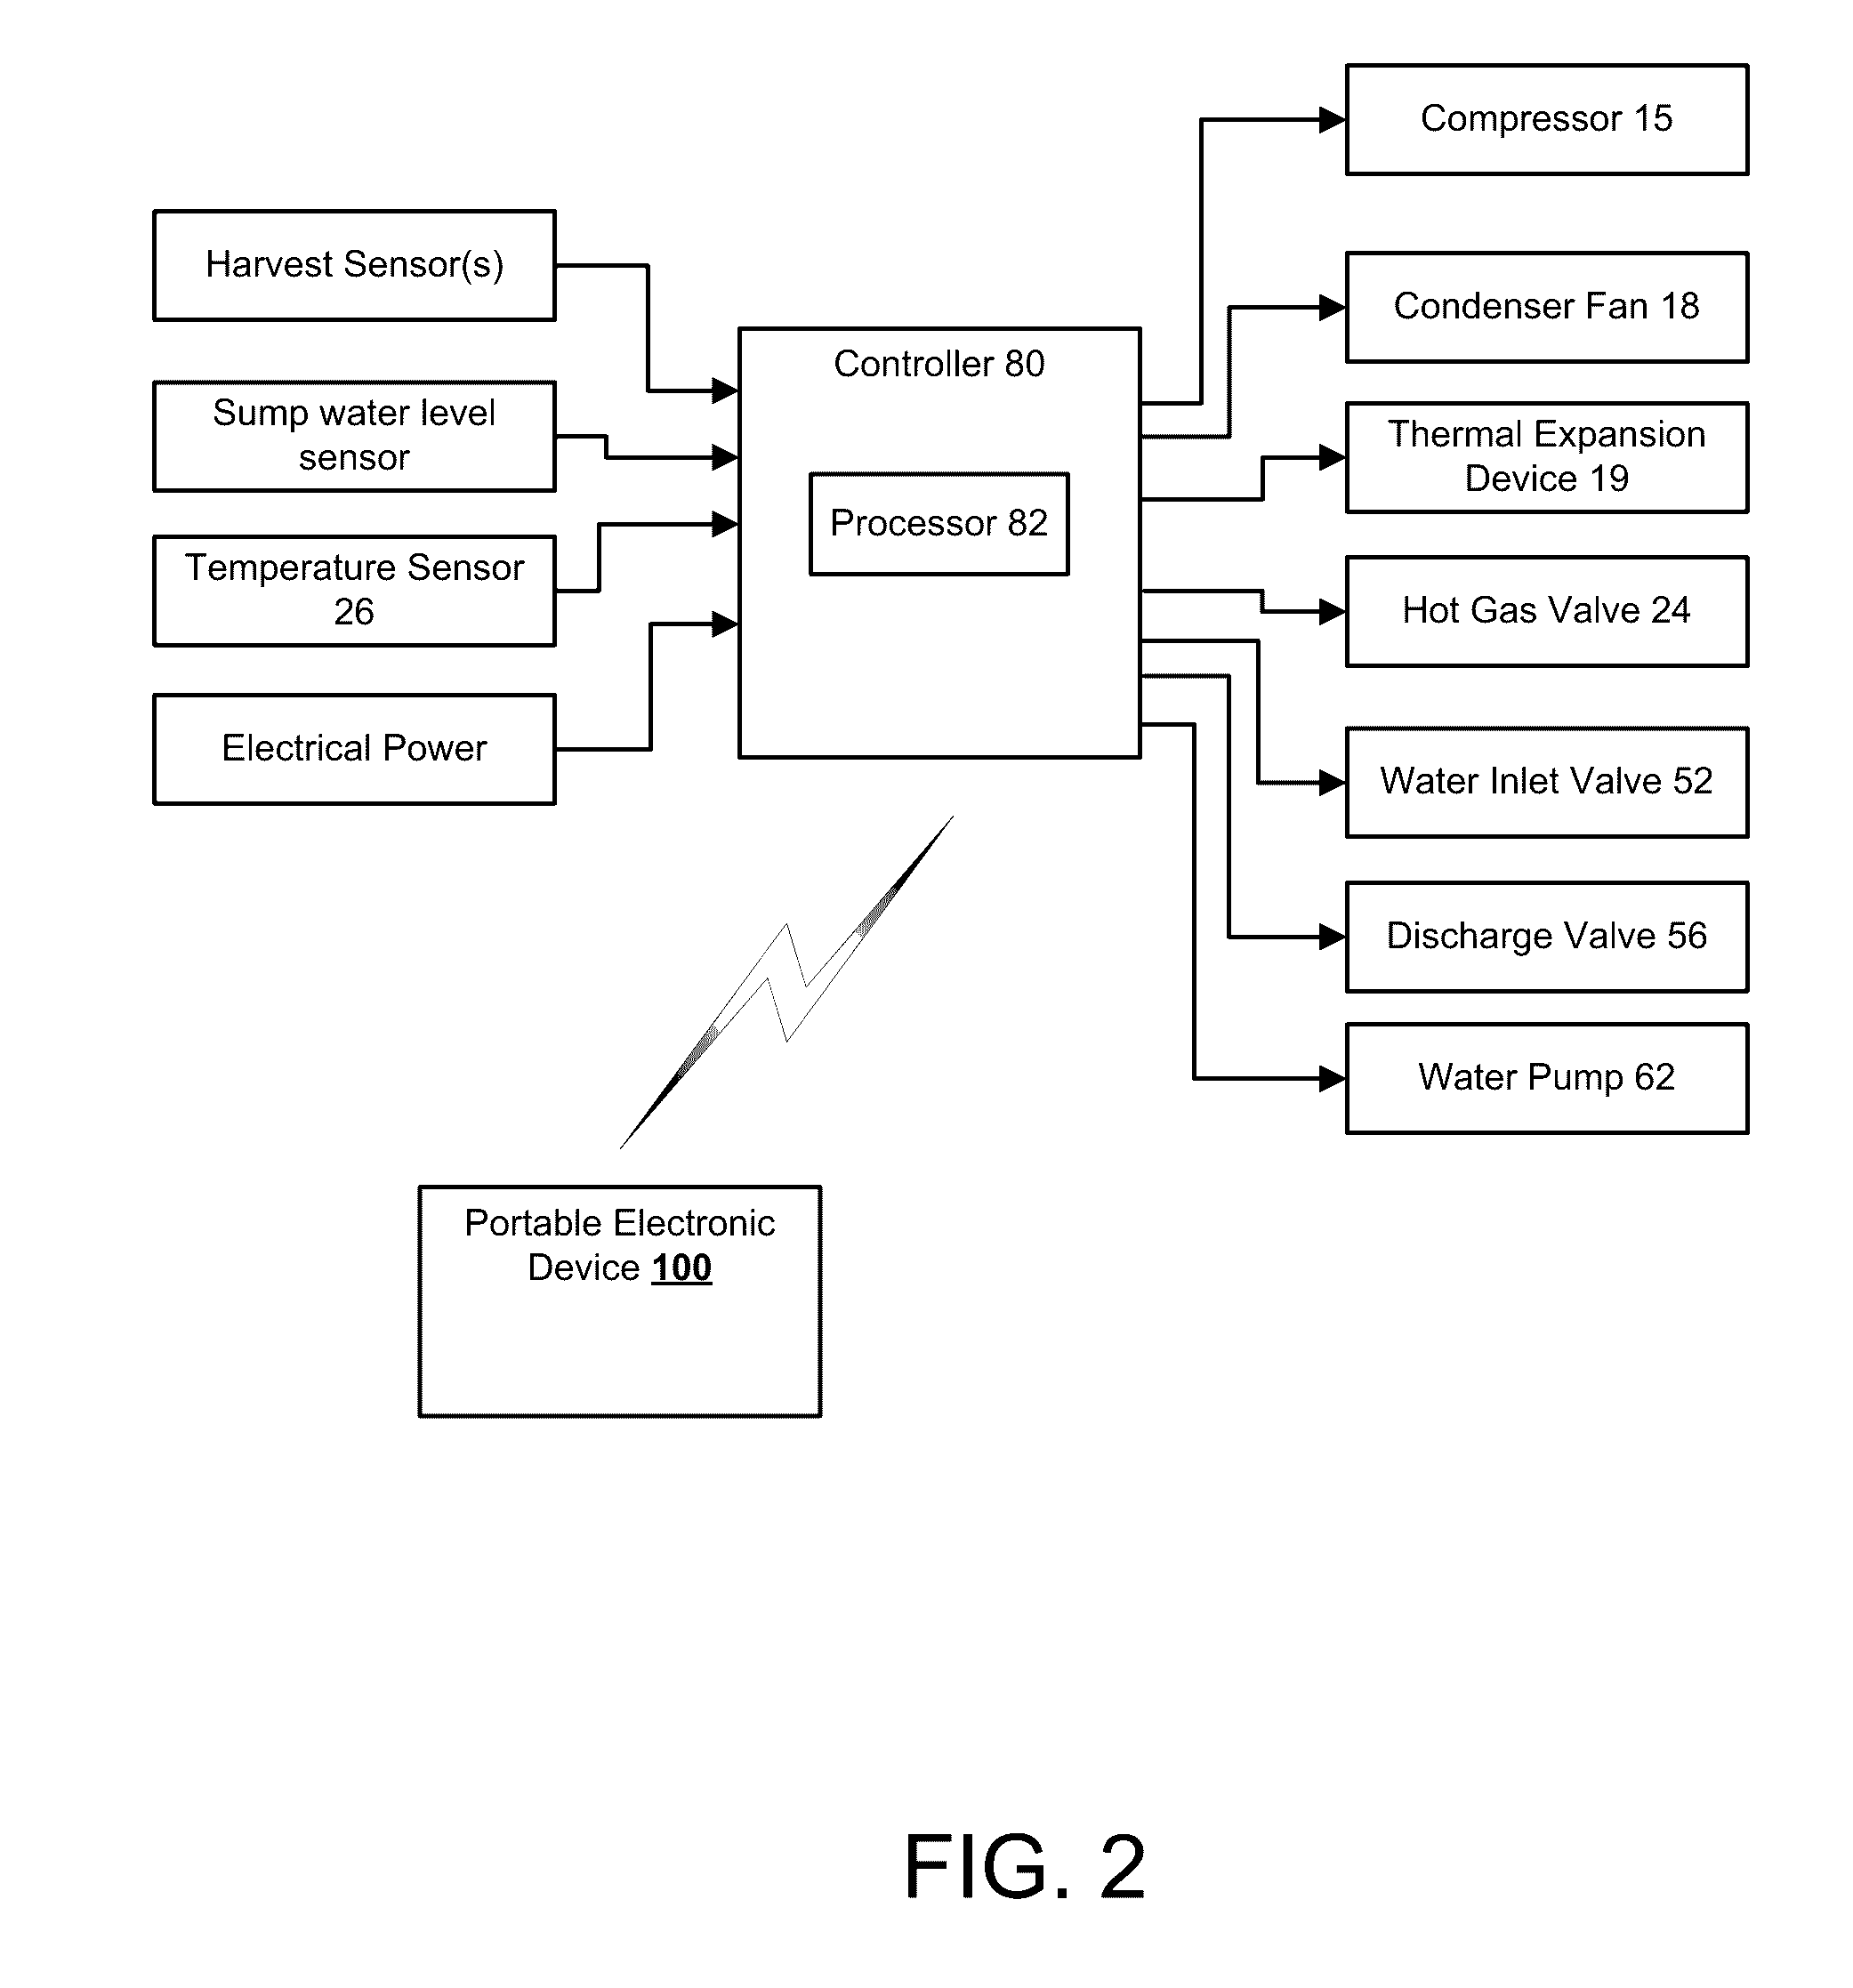 Ice maker with push notification to indicate when maintenance is required